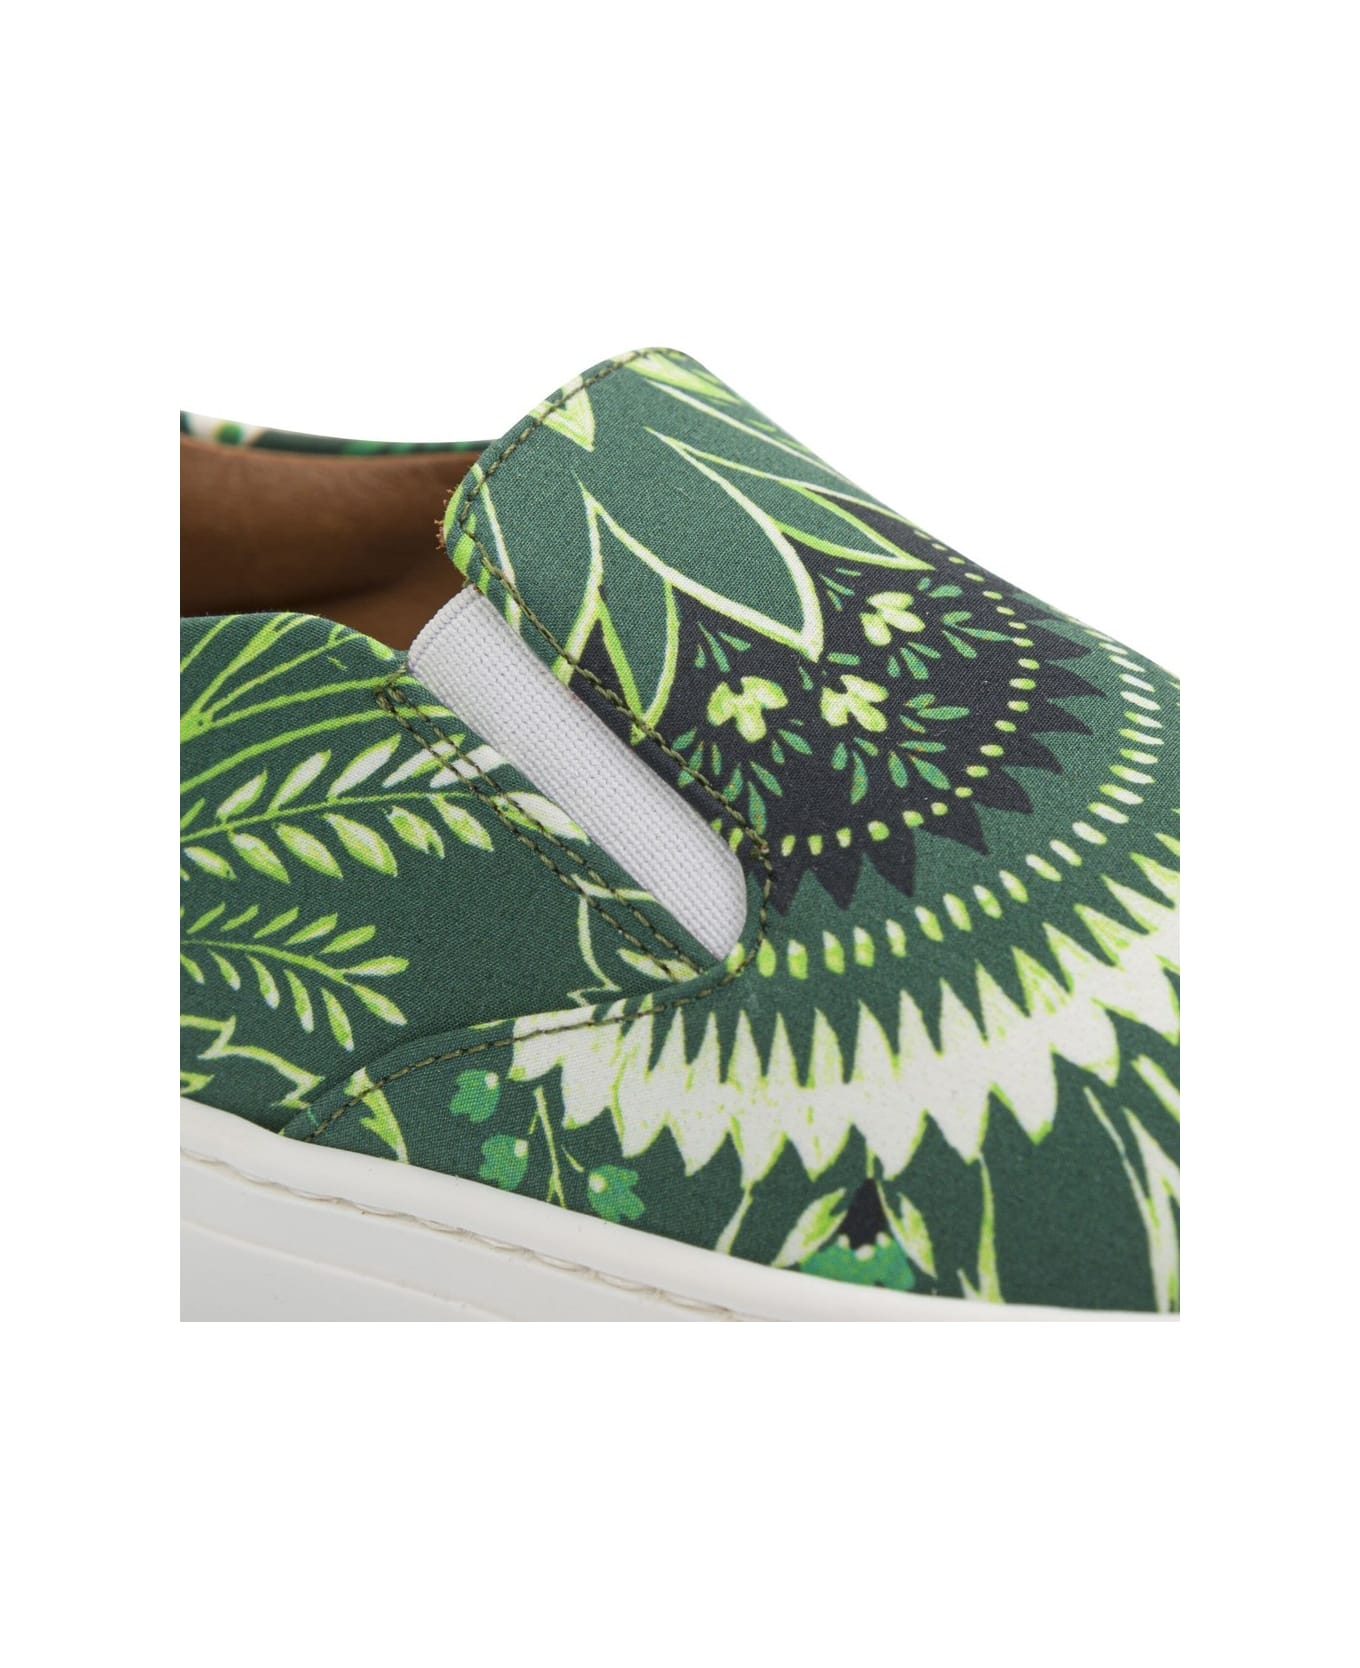 Etro Sneakers With Green Paisley Print - Green